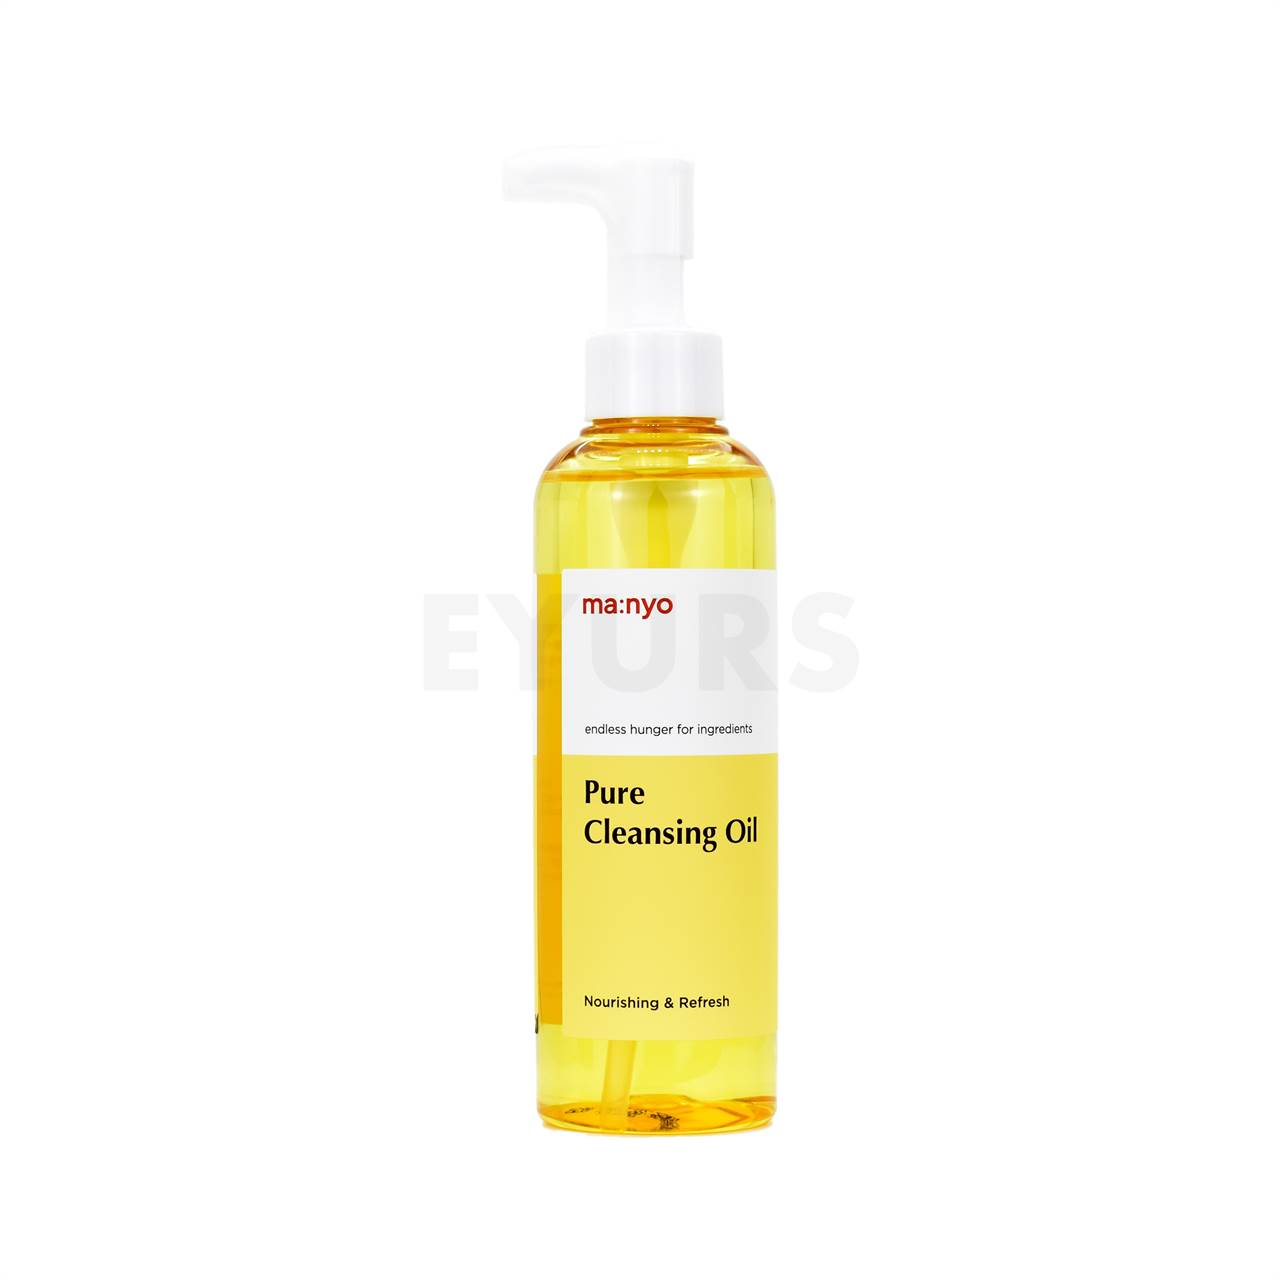 manyo pure cleansing oil front of product 